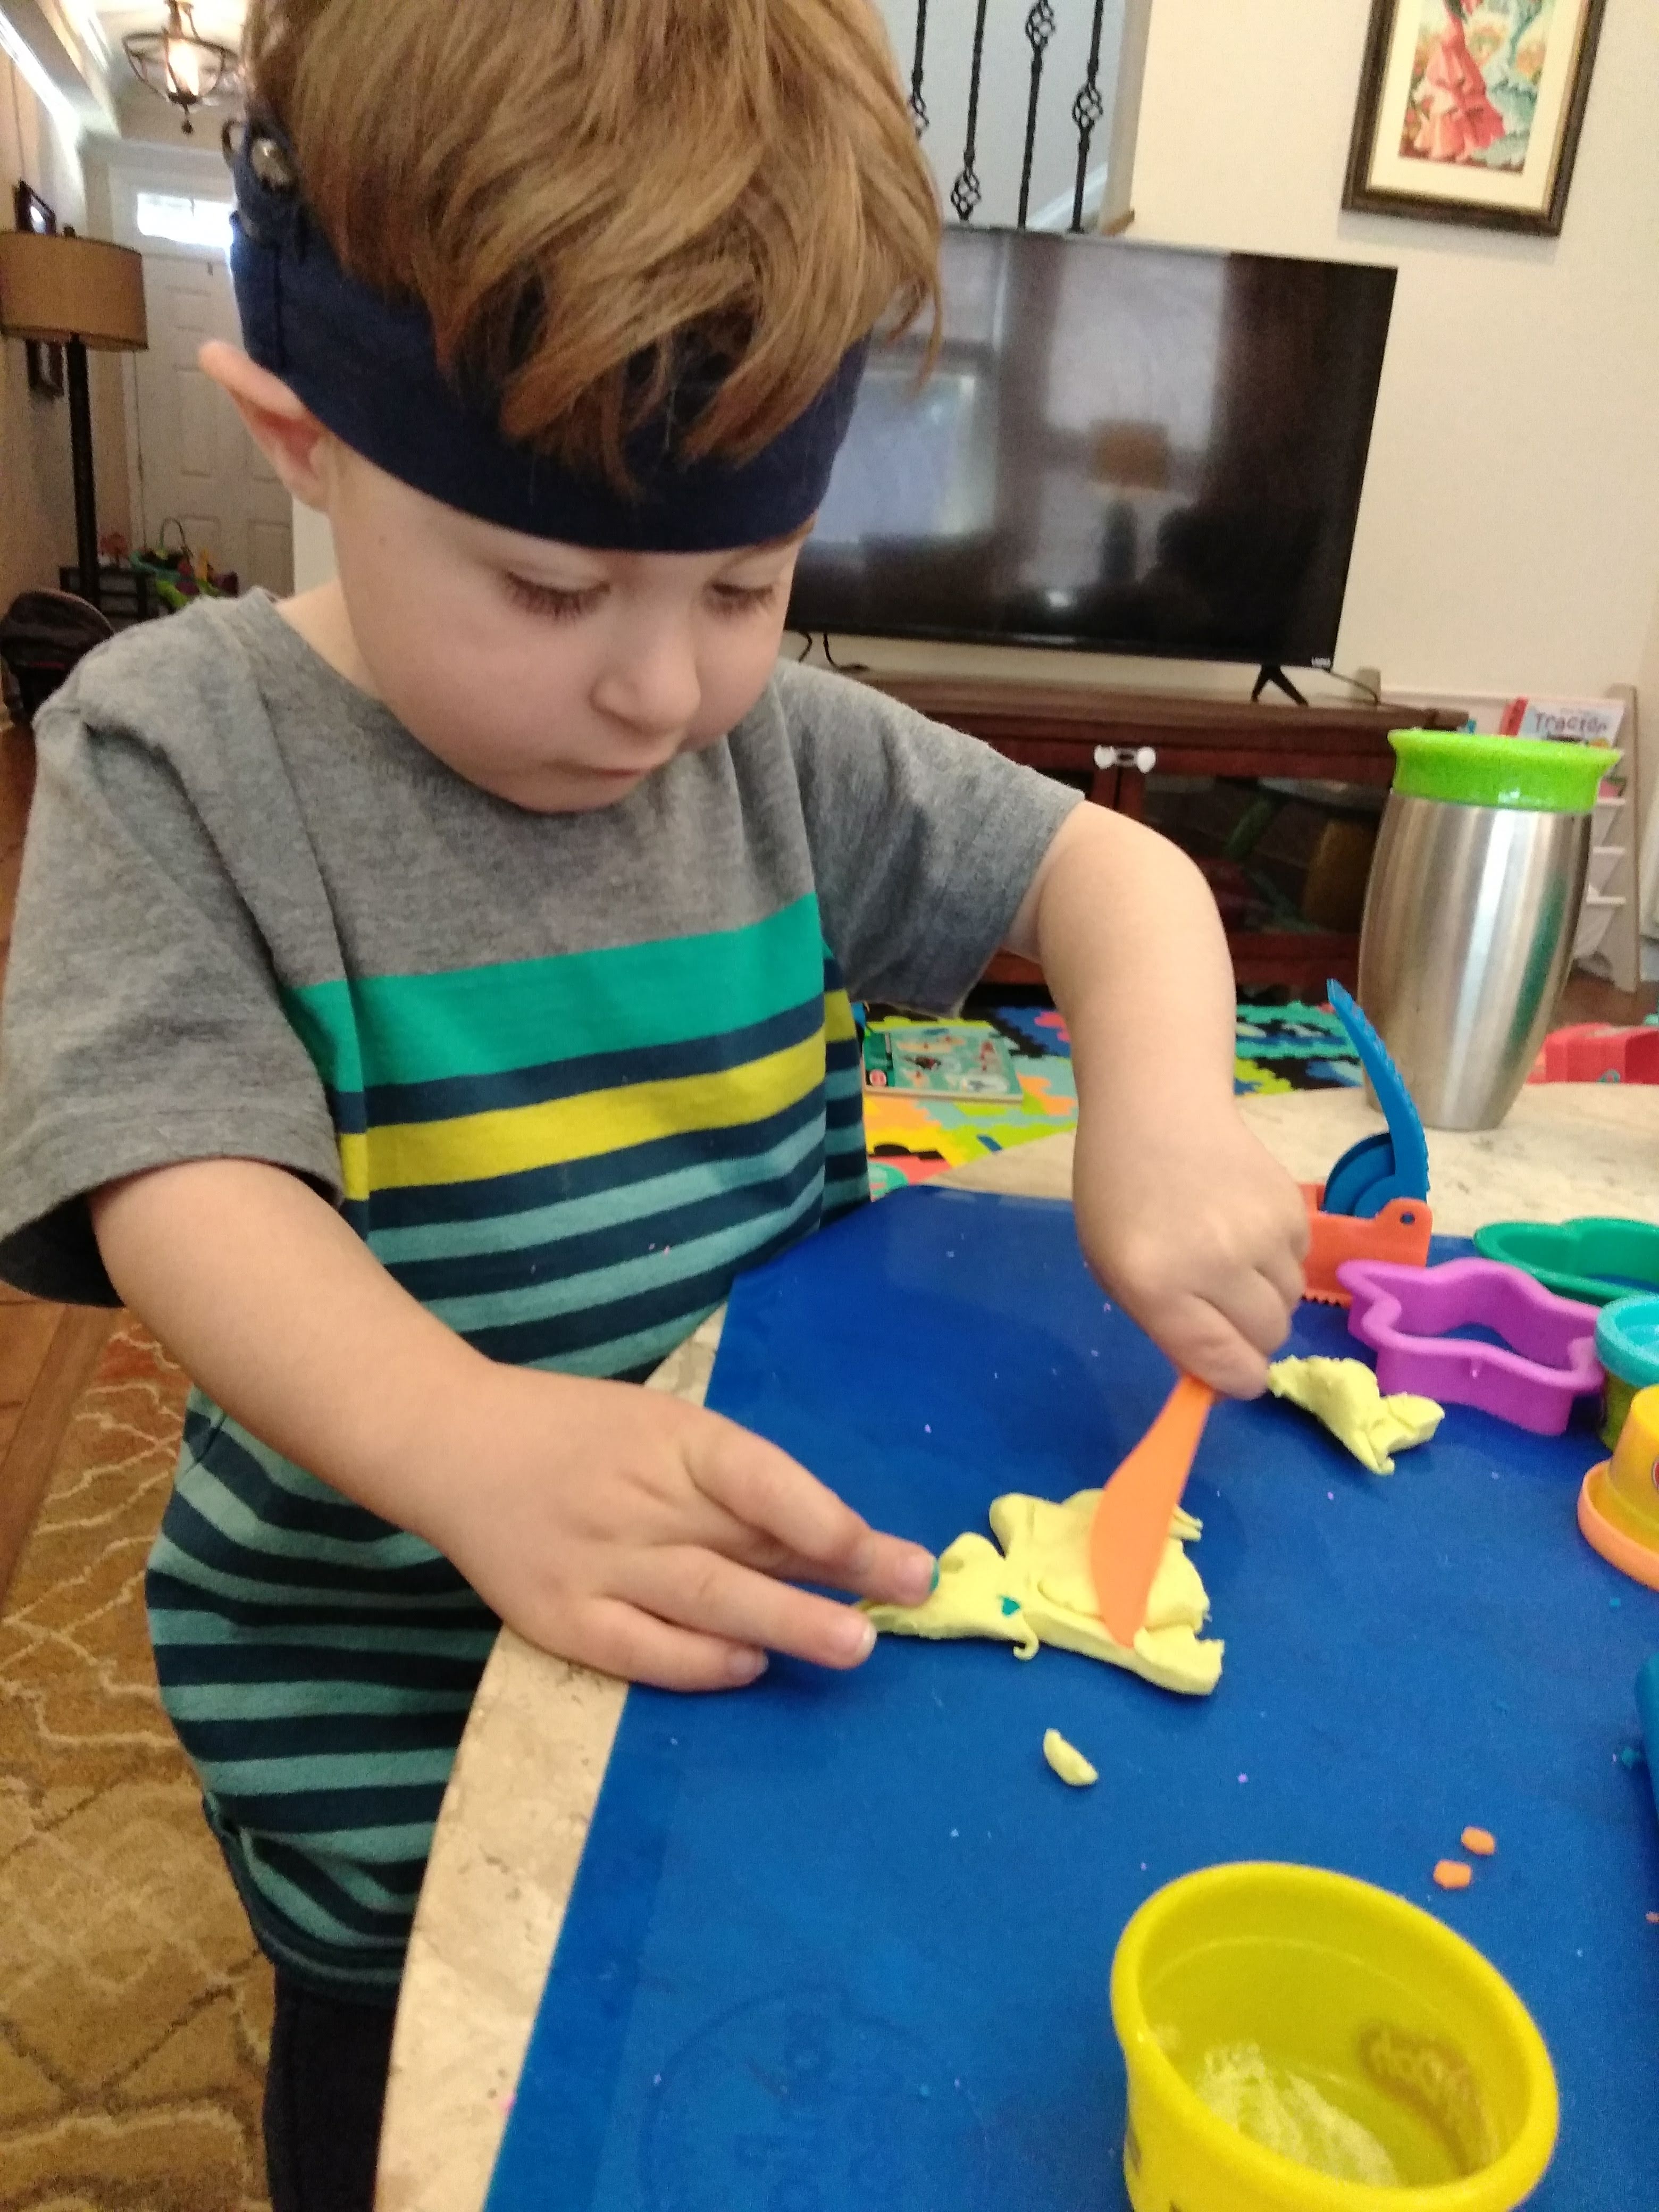 a boy with cochlear implants stands at a table and does playdough activities